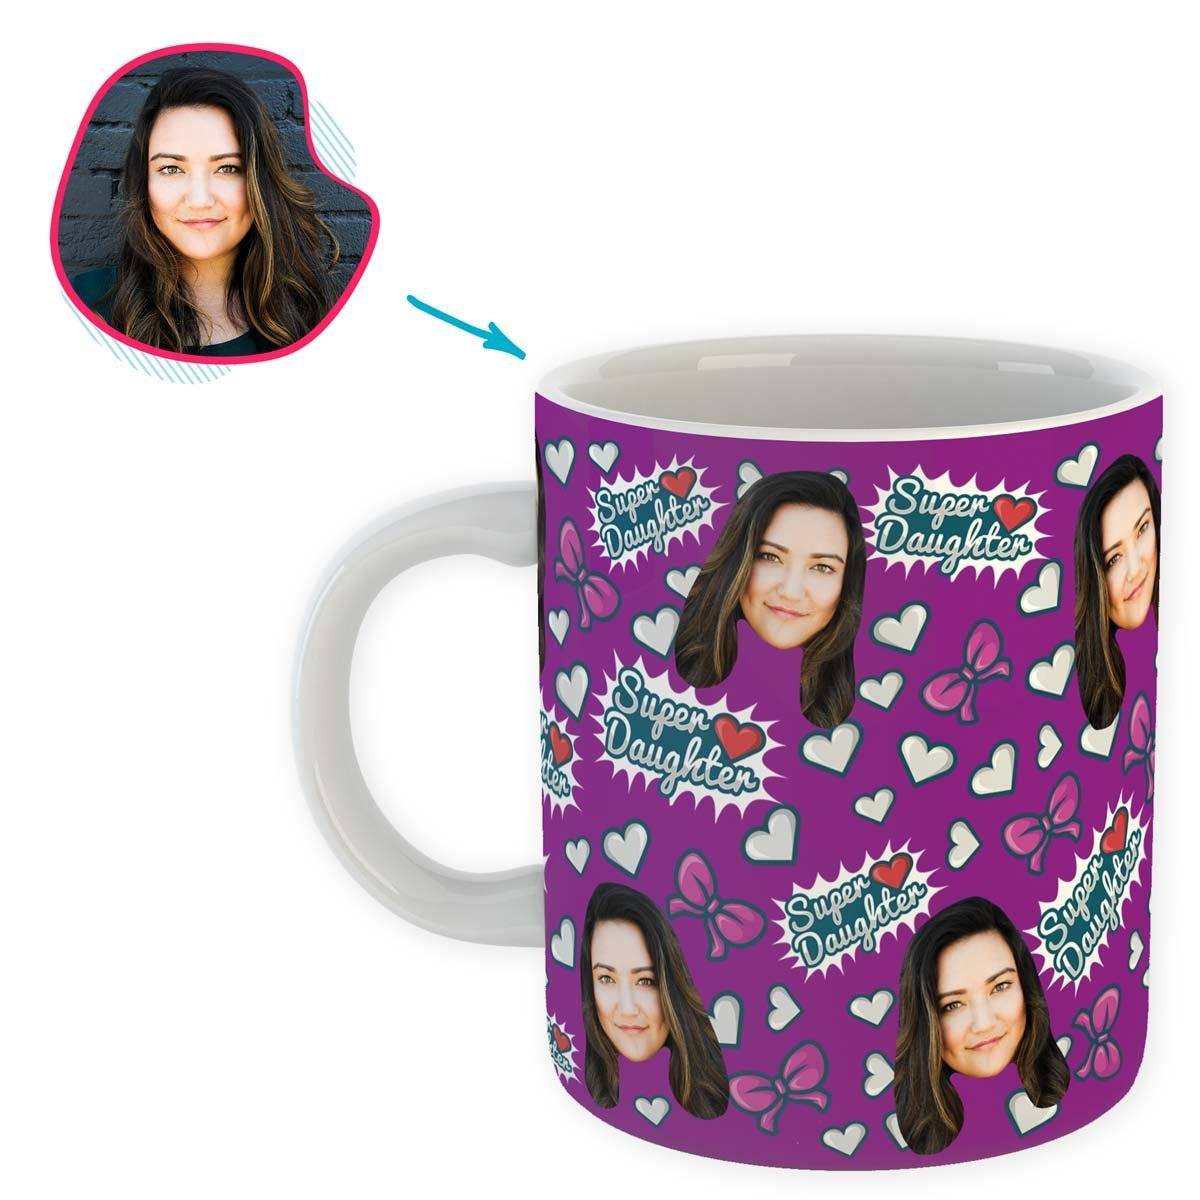 purple Super Daughter mug personalized with photo of face printed on it